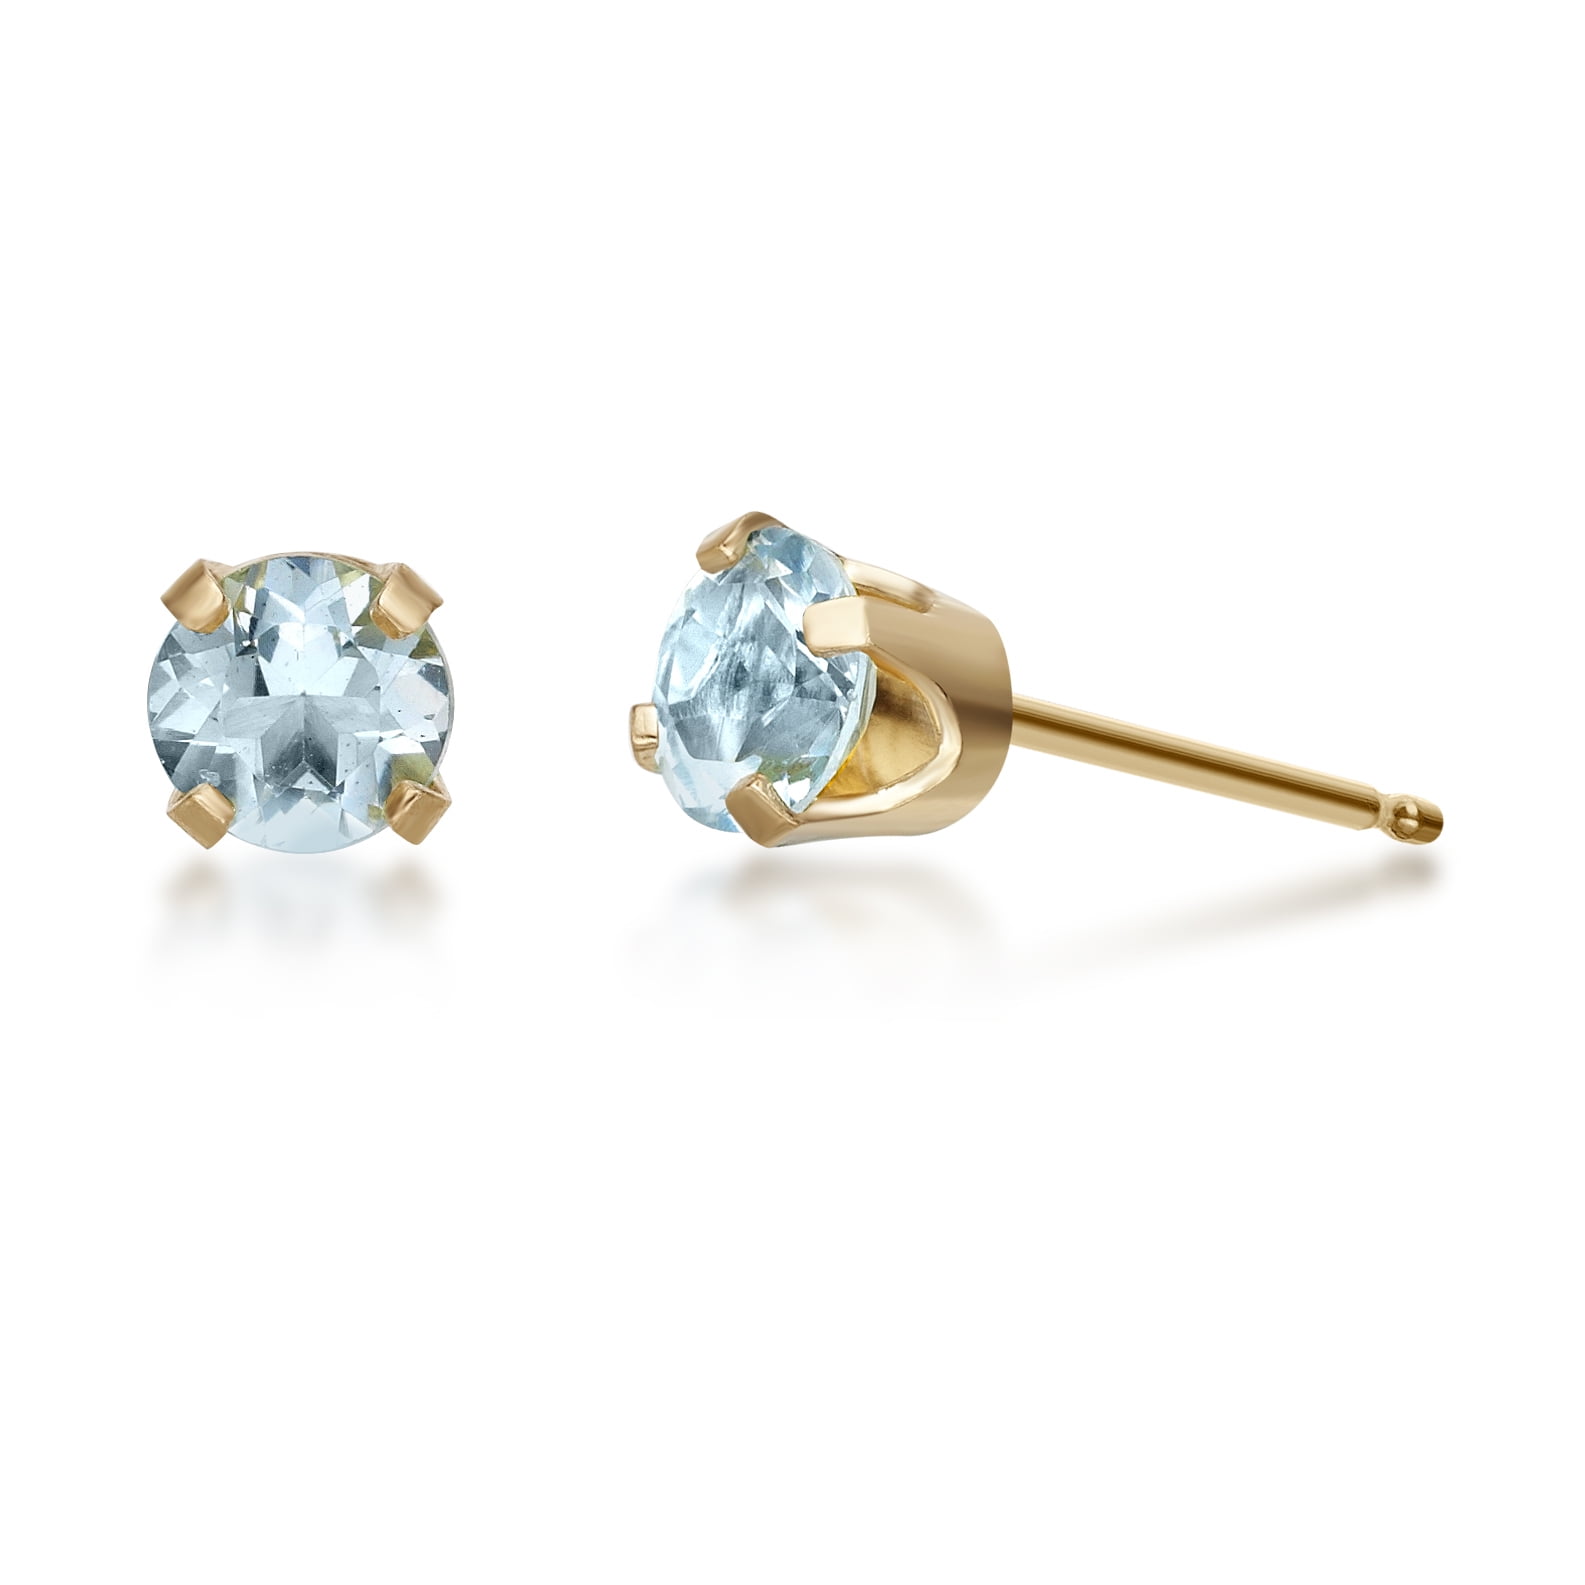 1CT Blue Aquamarine & Clear Halo Stud Round Earrings 14k Yellow Gold